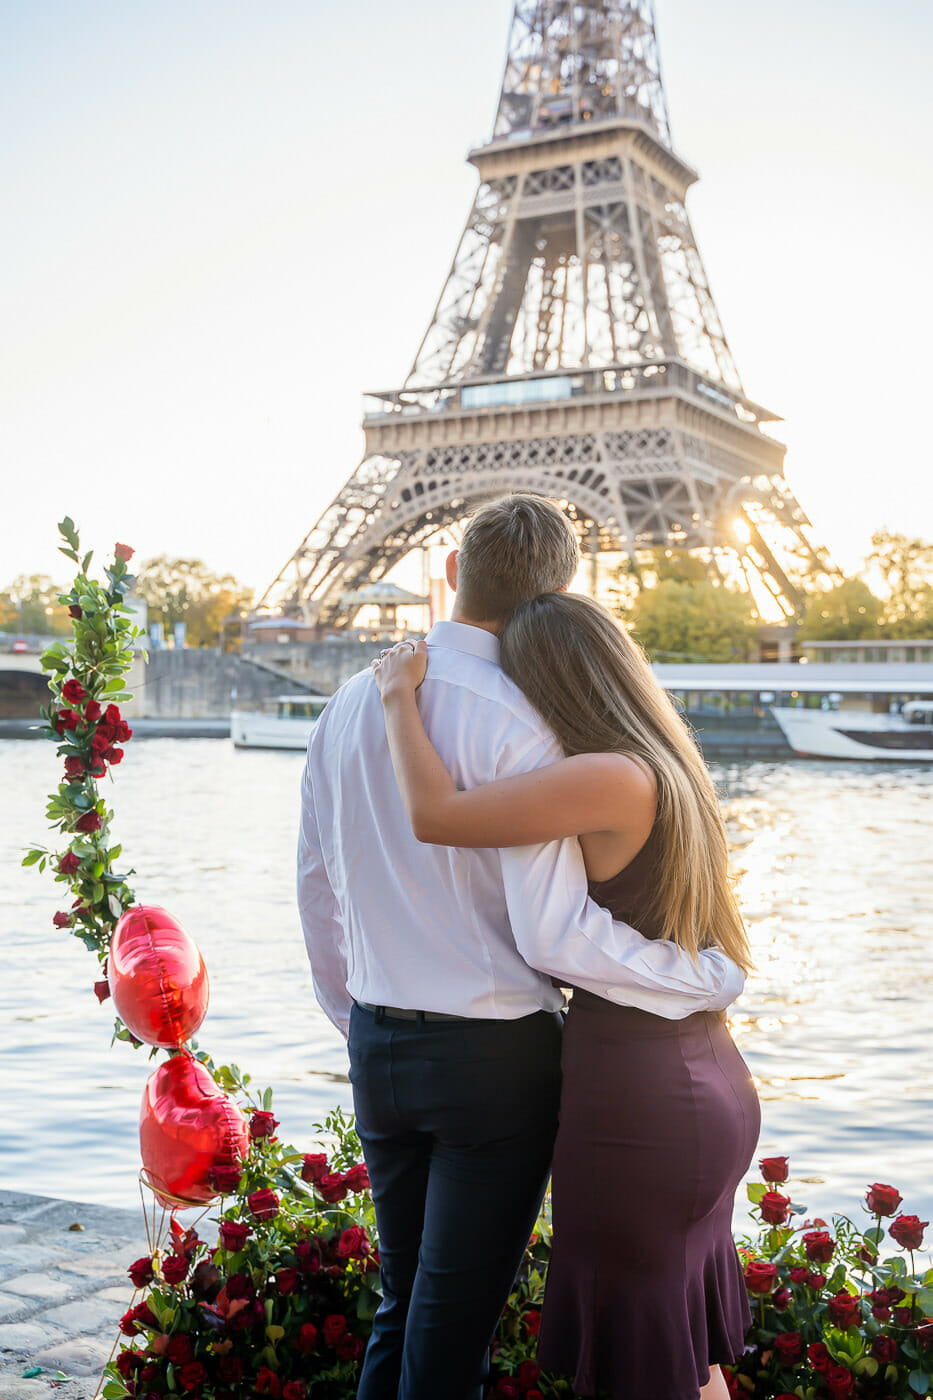 Dreamy Paris engagement photos taken at the Eiffel Tower after the proposal